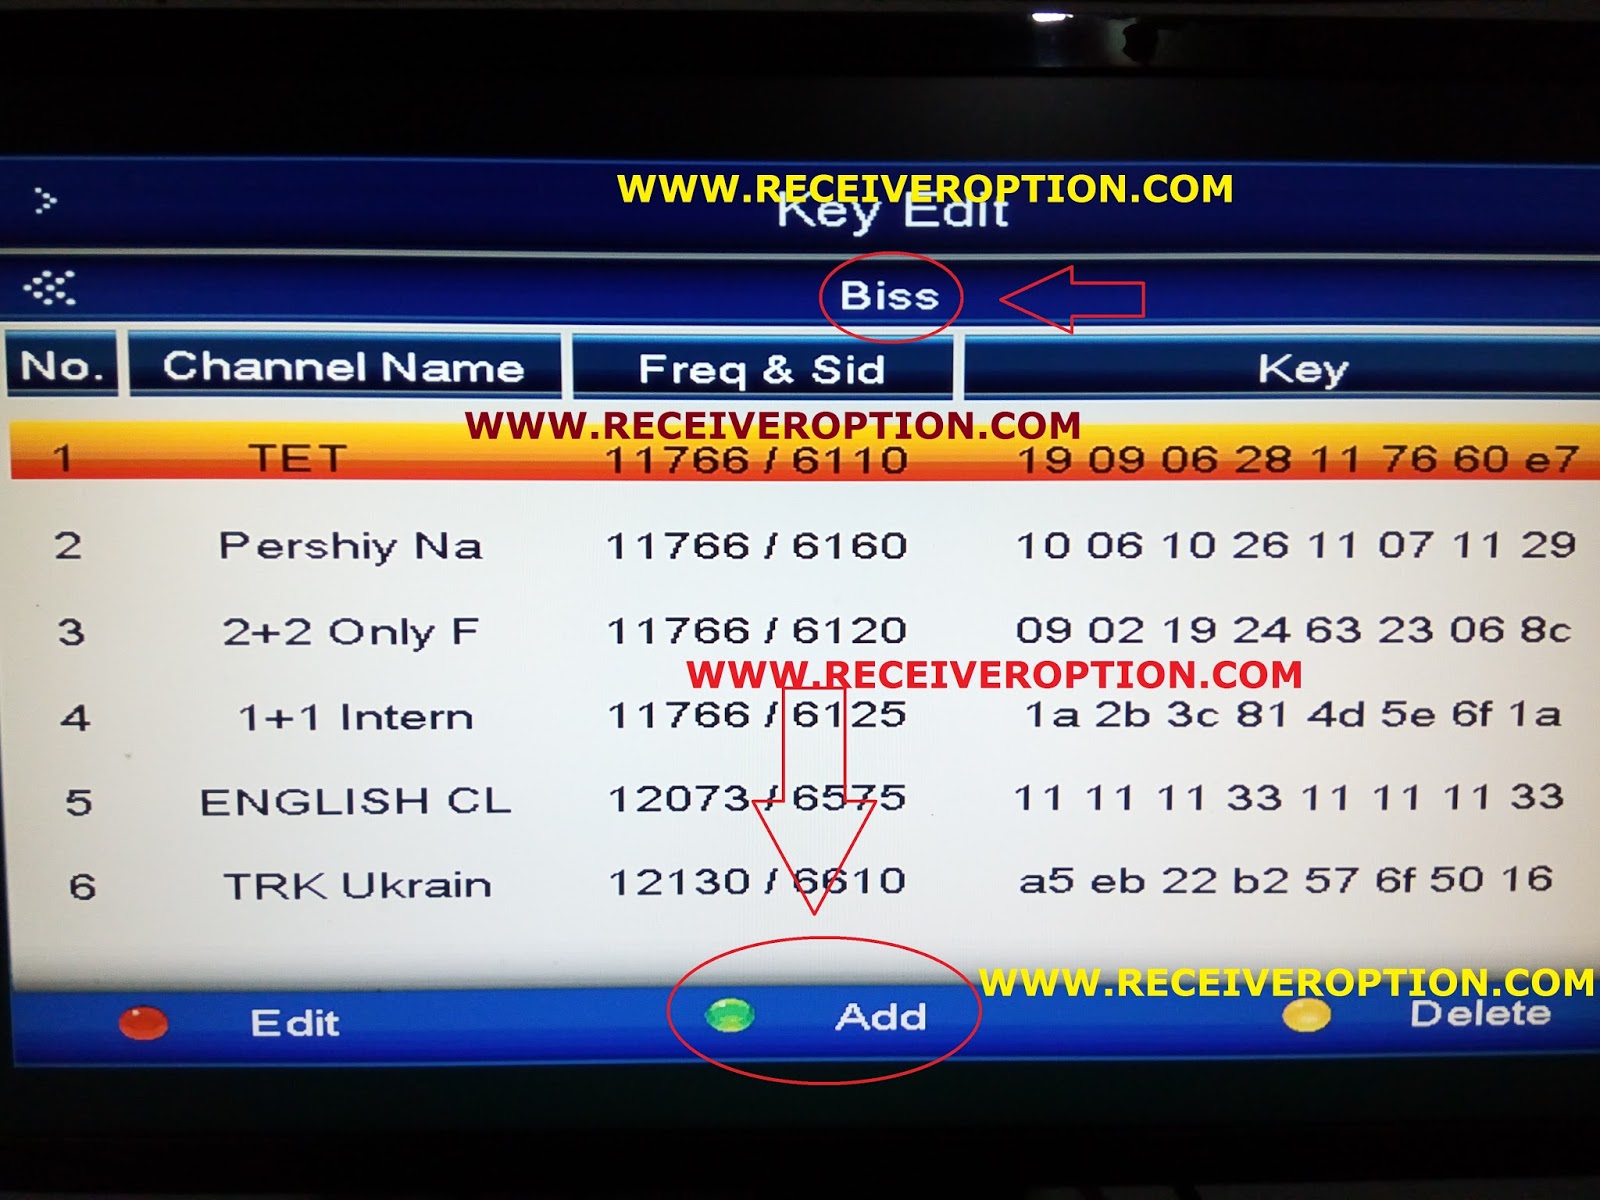 How to ADD biss key in azfox S3S HD receiver.